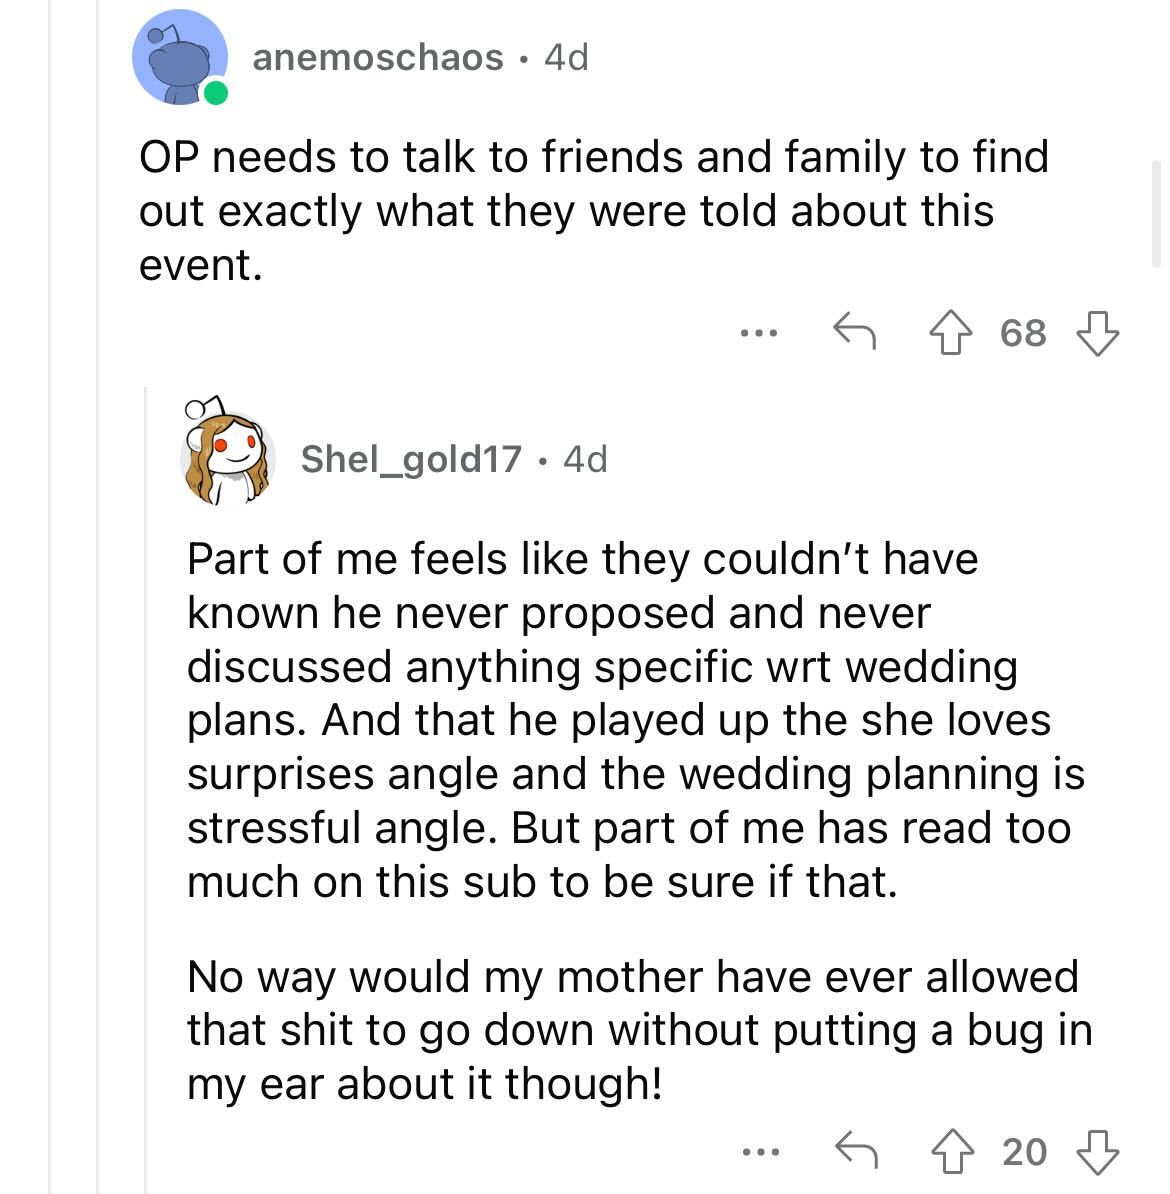 am i the asshole thread on reddit - document - anemoschaos 4d Op needs to talk to friends and family to find out exactly what they were told about this event. ... 68 Shel_gold17. 4d Part of me feels they couldn't have known he never proposed and never dis